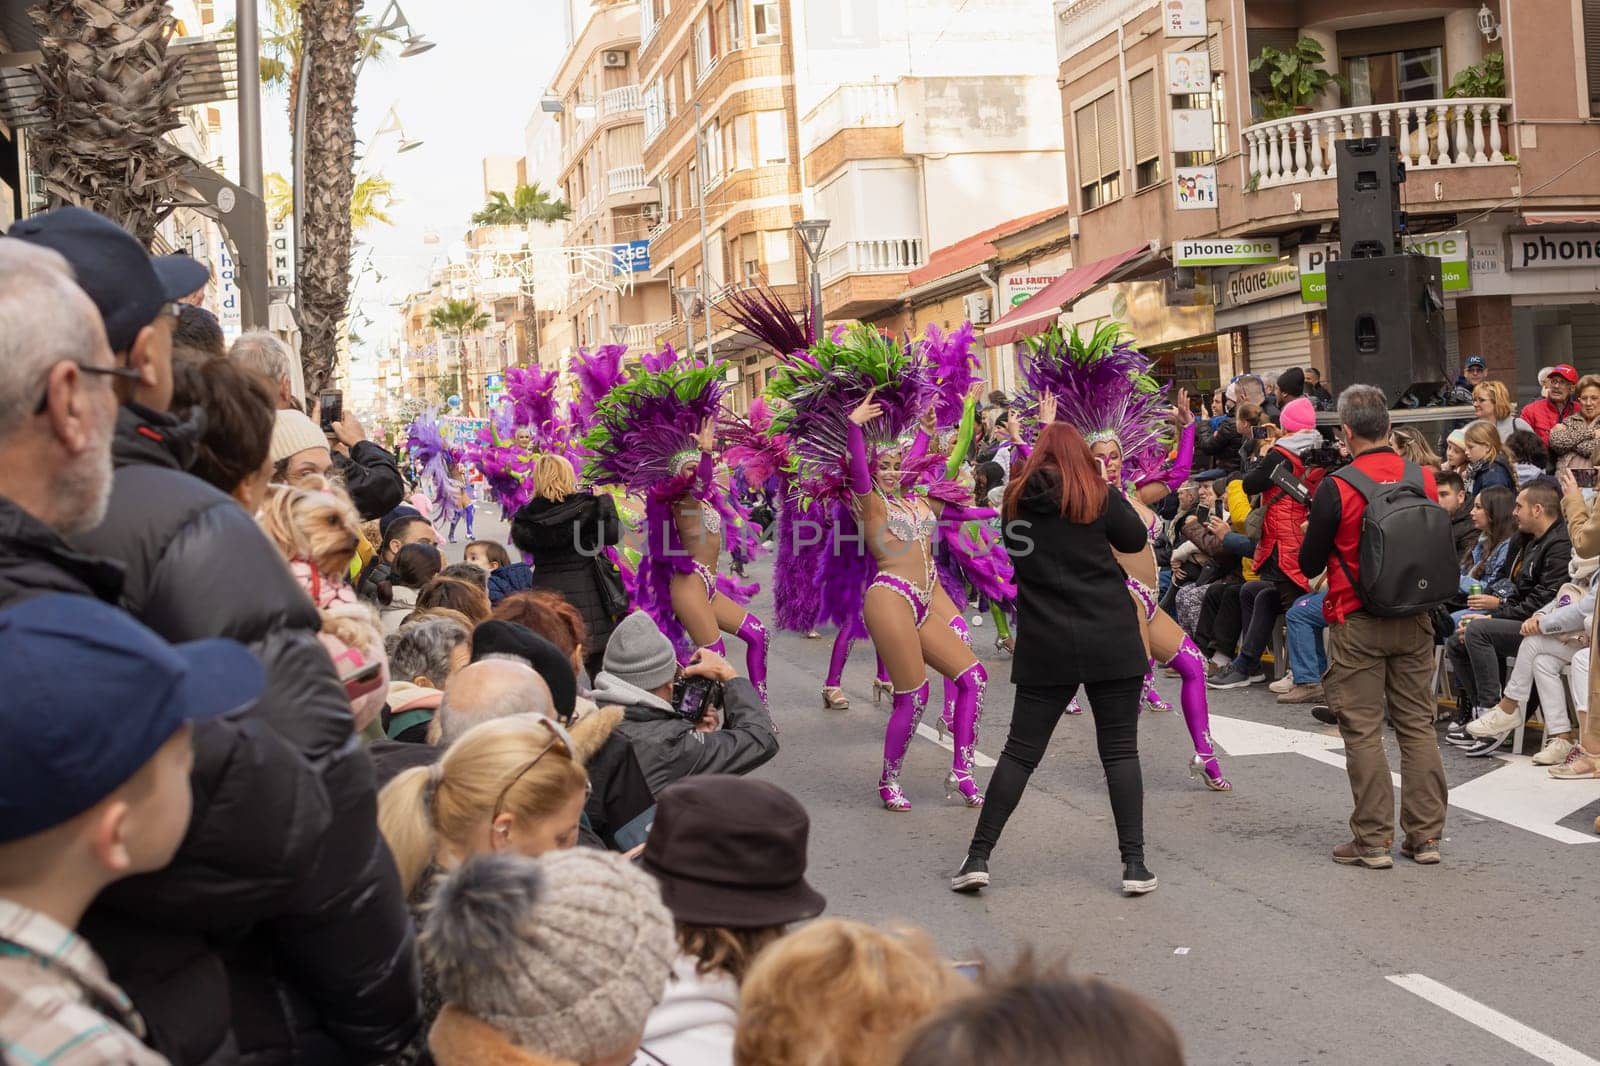 Carnival in Spain, the city of Torrevieja, February 12, 2023, people walk at the carnival. High quality photo